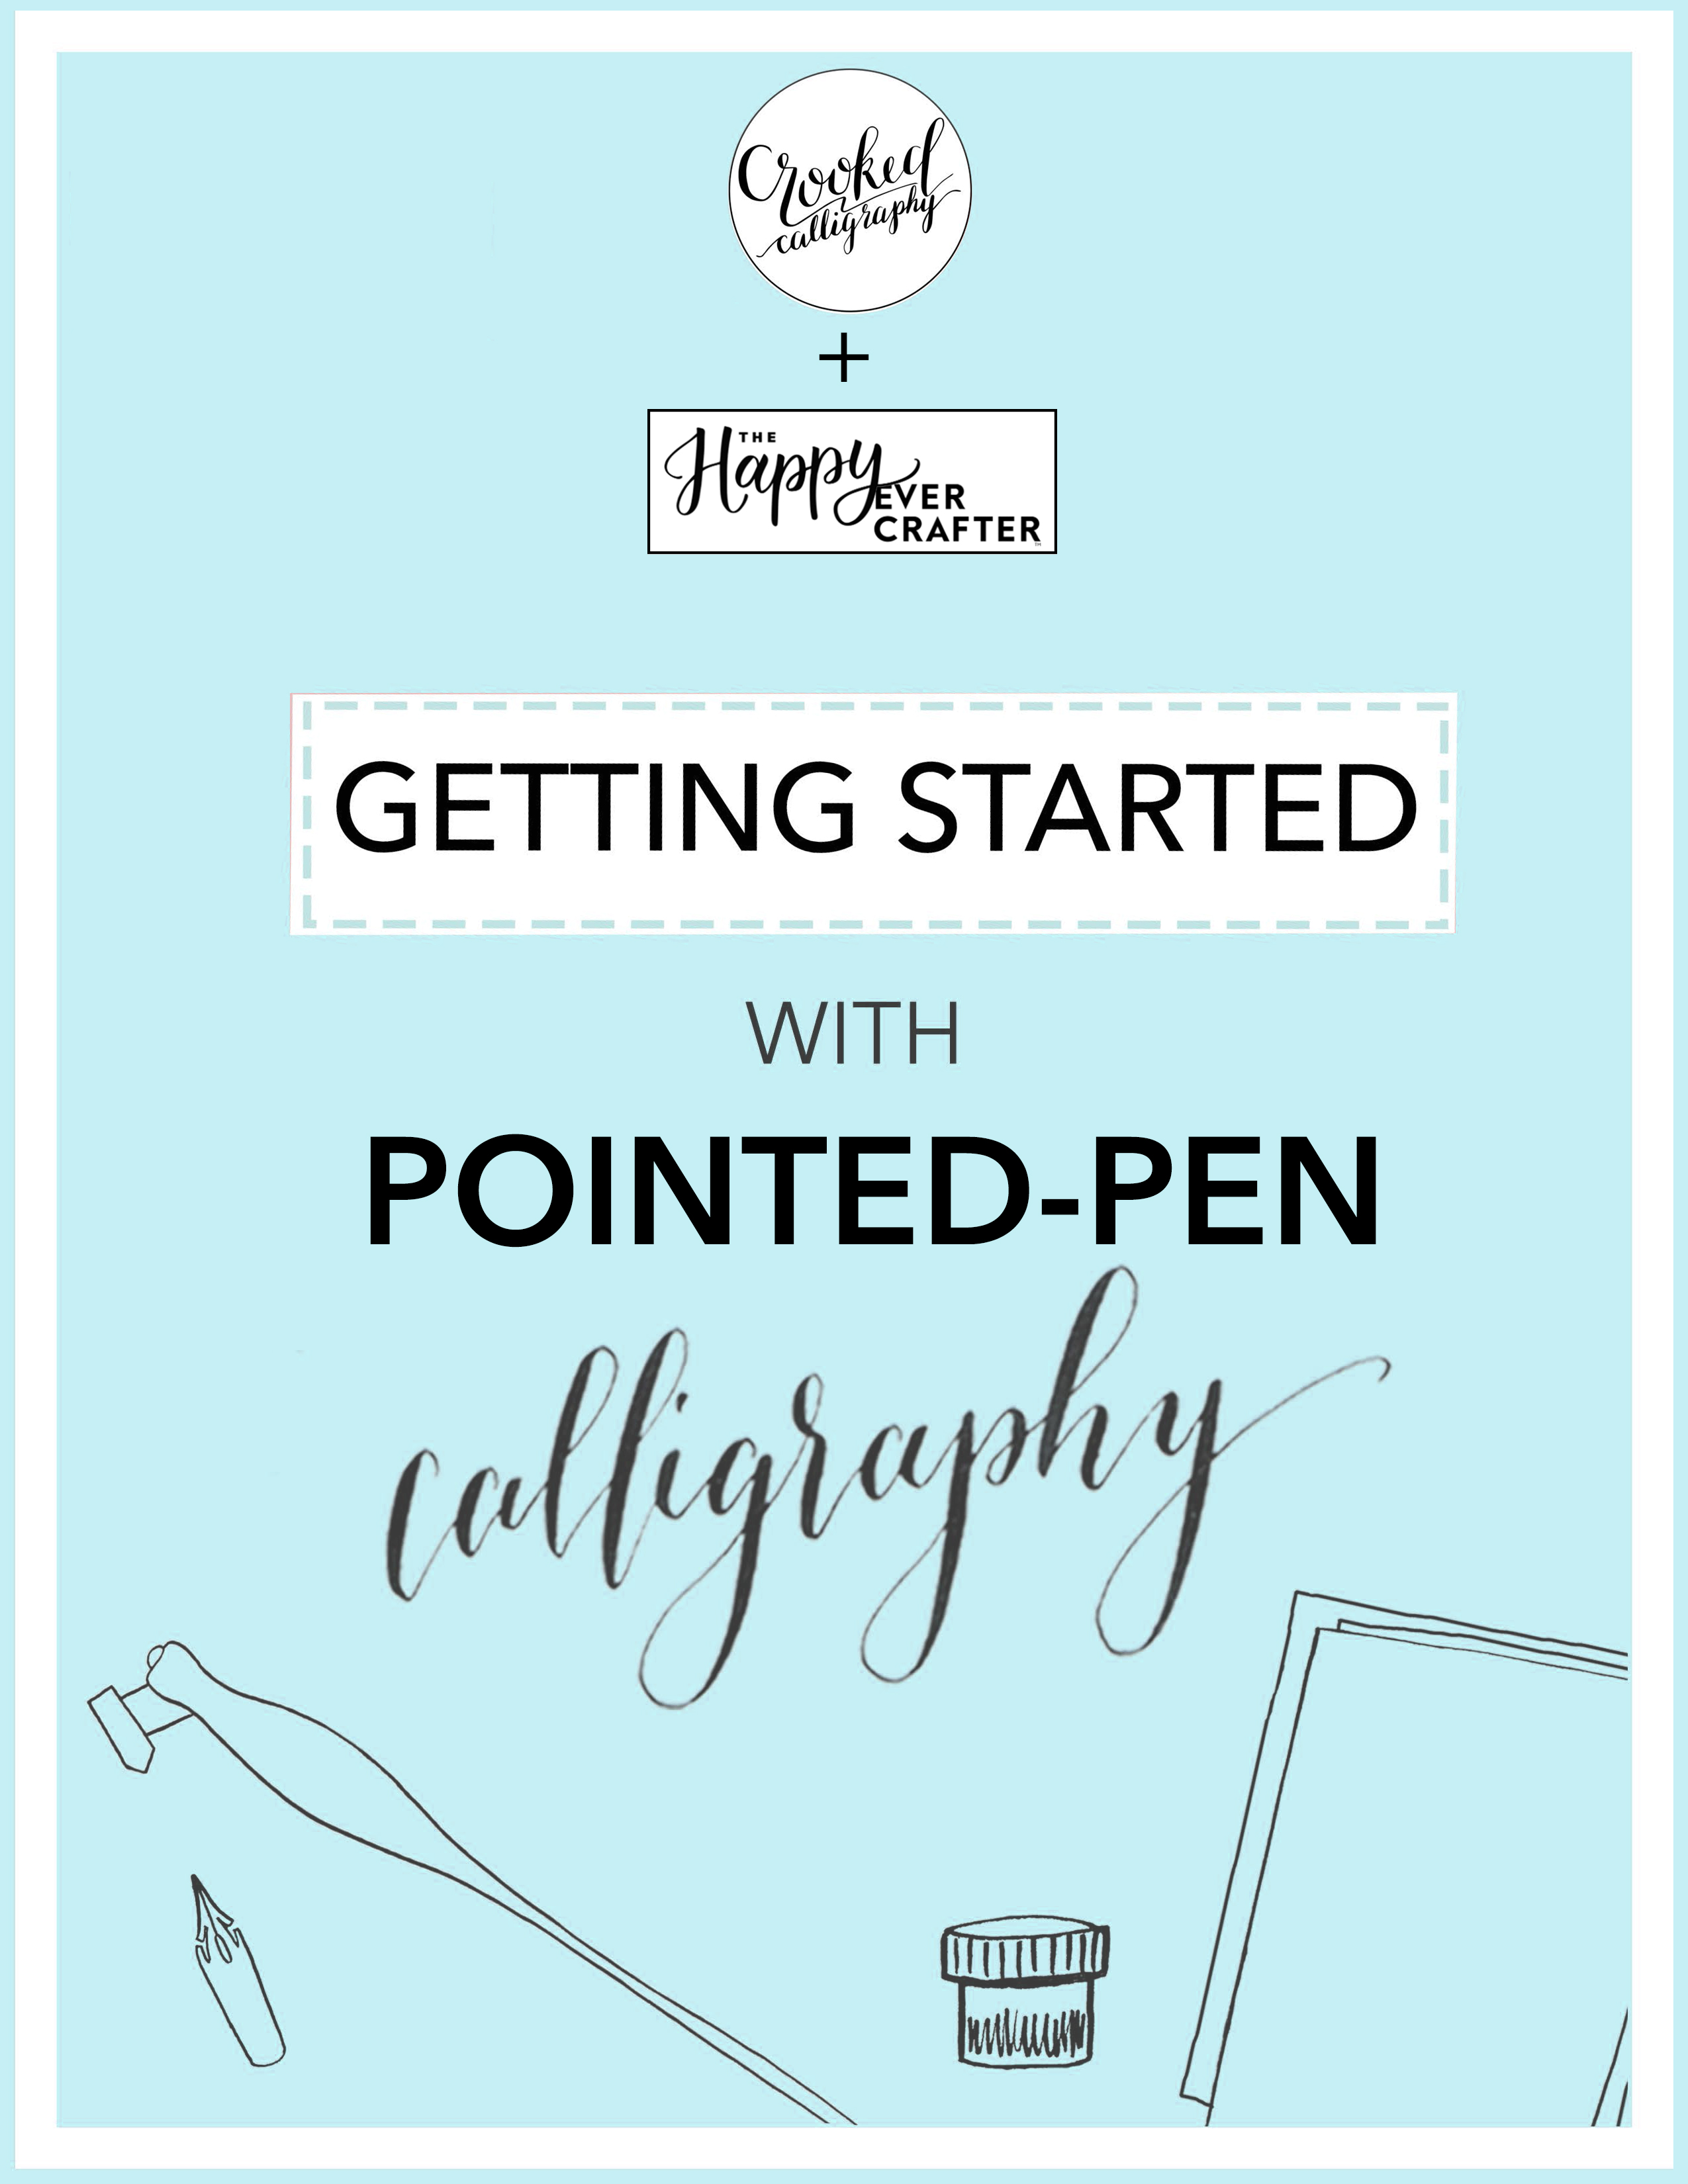 Learn Calligraphy On A Budget - The Happy Ever Crafter